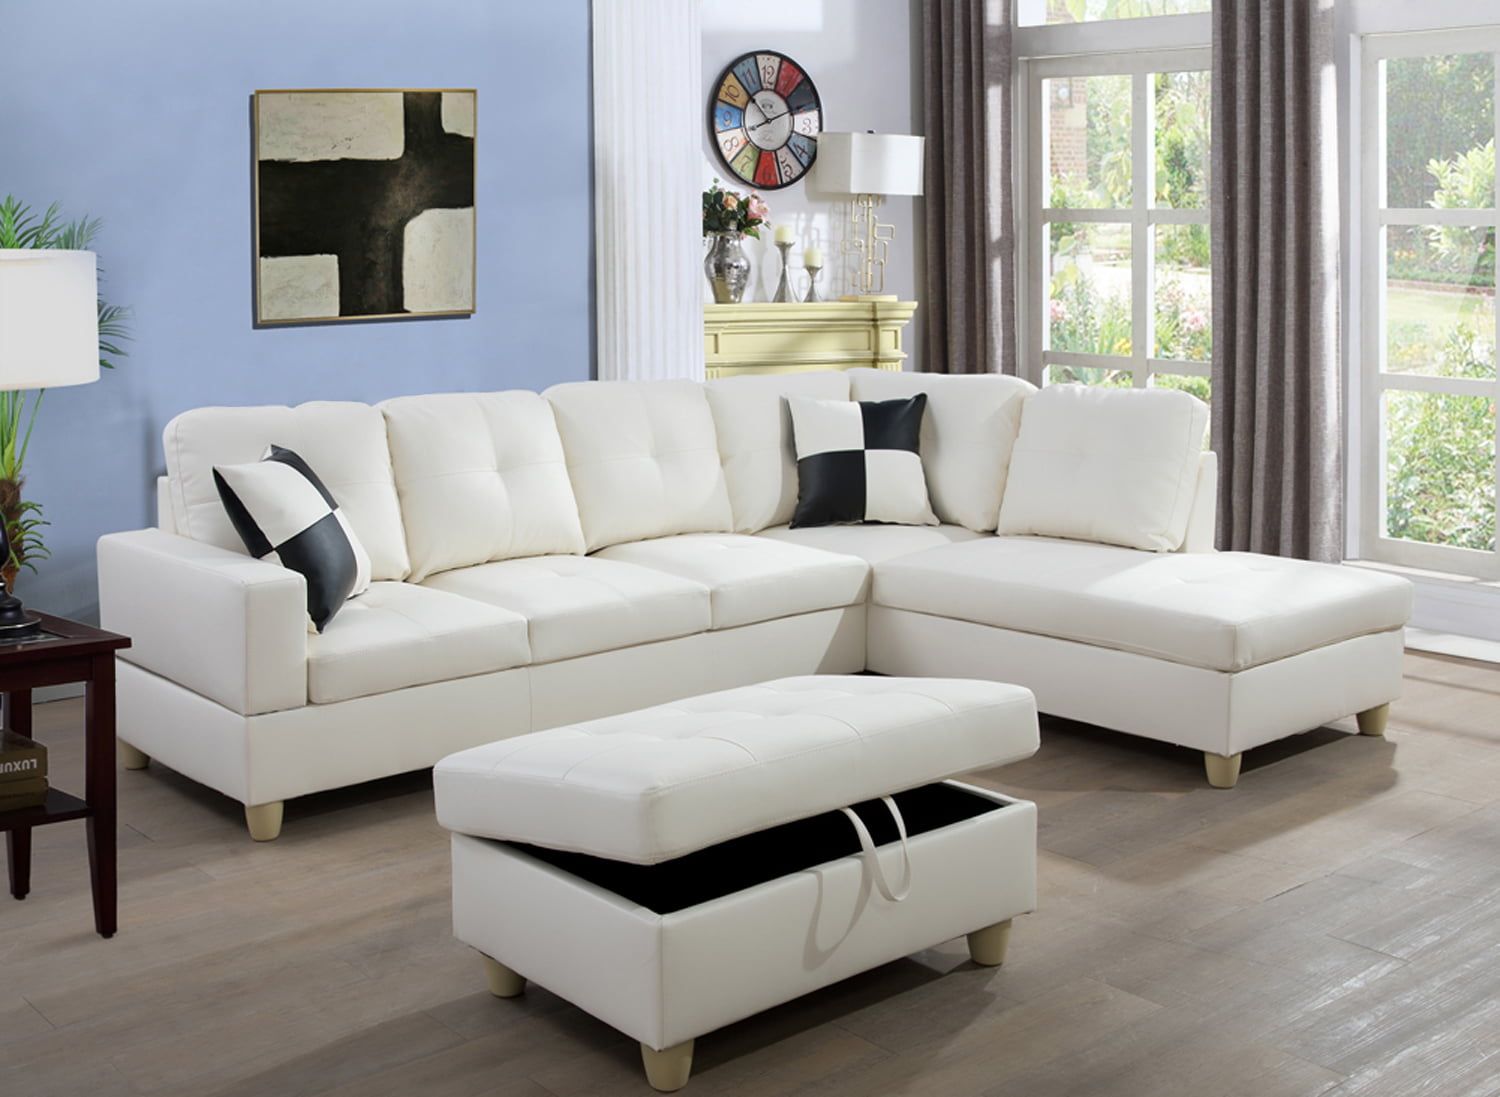 Ainehome Faux Leather Sectional Set, Living Room L Shaped Modern Sofa With Sofas With Ottomans (Gallery 9 of 20)